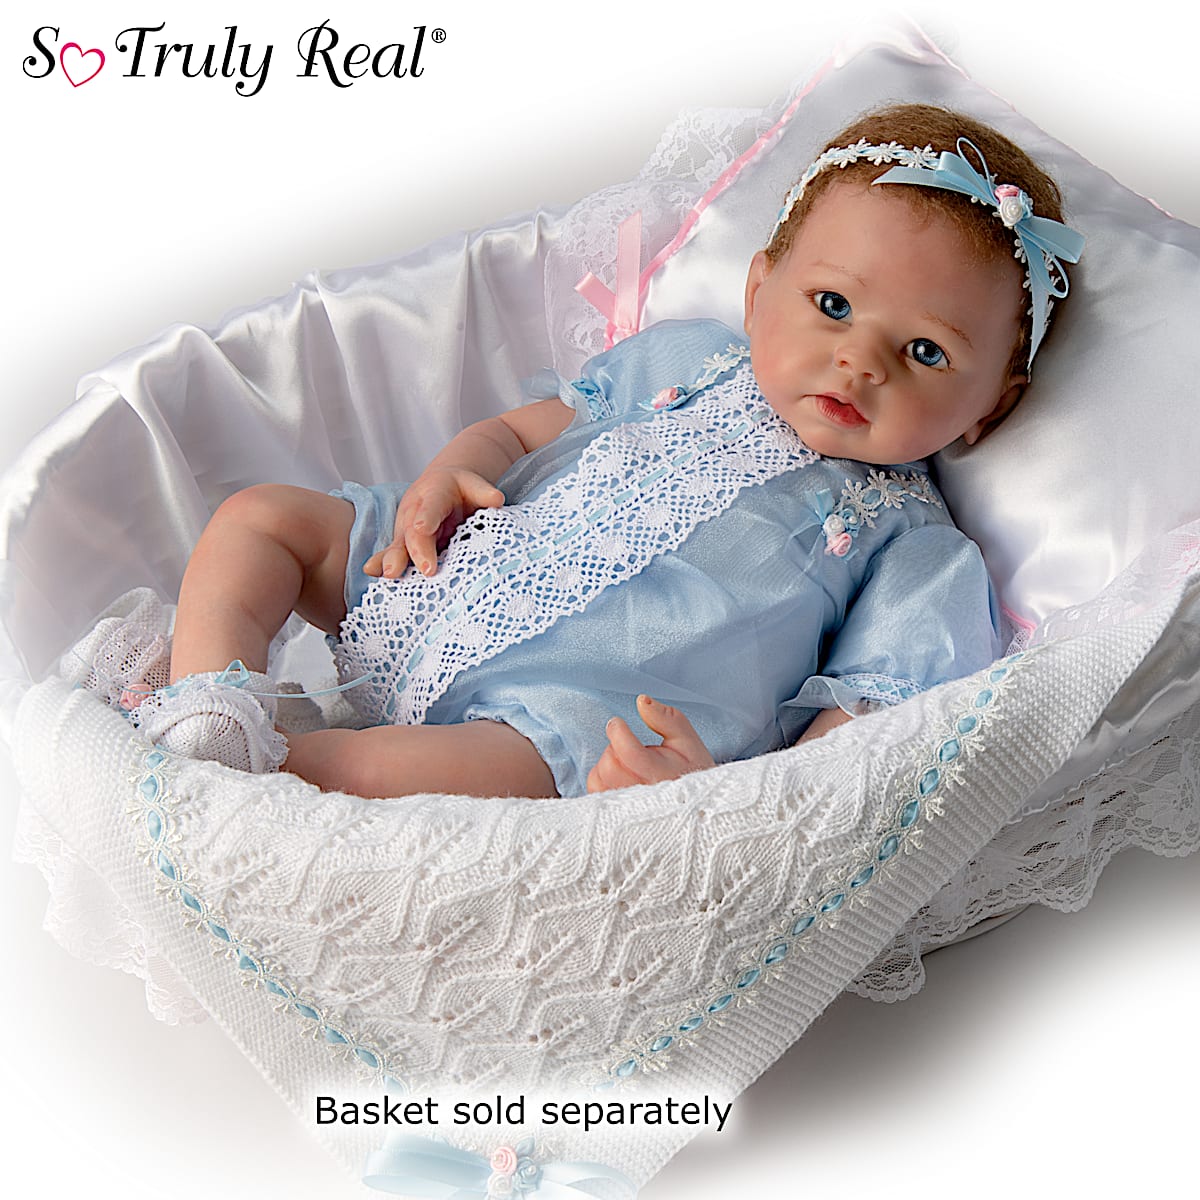 Forget Me Not Katie Hand-Painted Reborn Baby Doll Featuring Inset ...